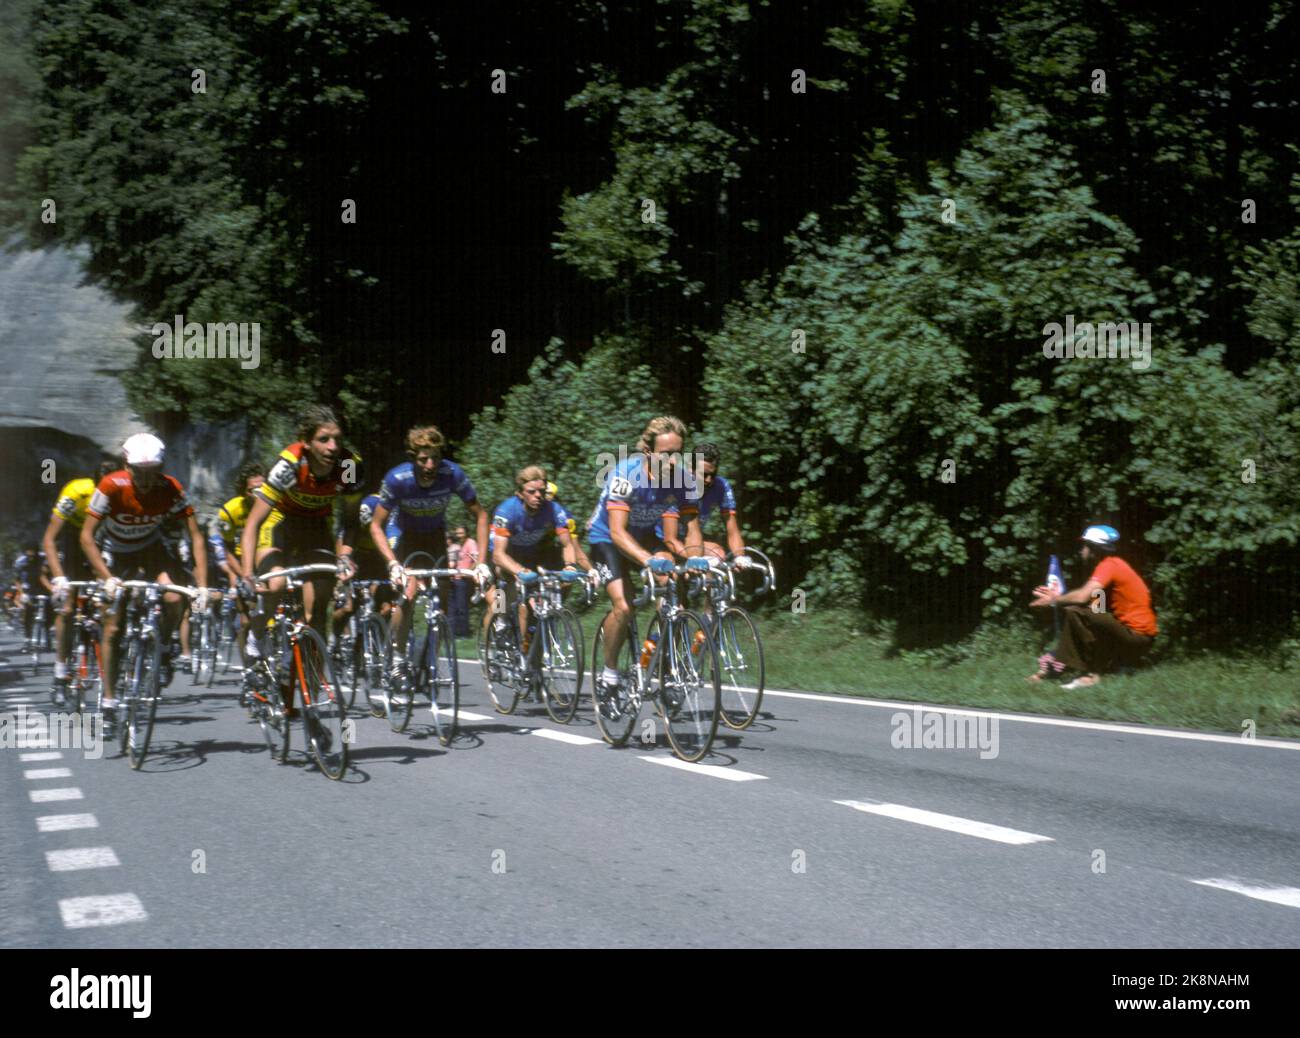 Switzerland 198206 Cyclist Jostein Wilmann (No. 20) participates in the Tour de Suisse for professional cyclists. His team is called Capri-Sonne. Stock Photo